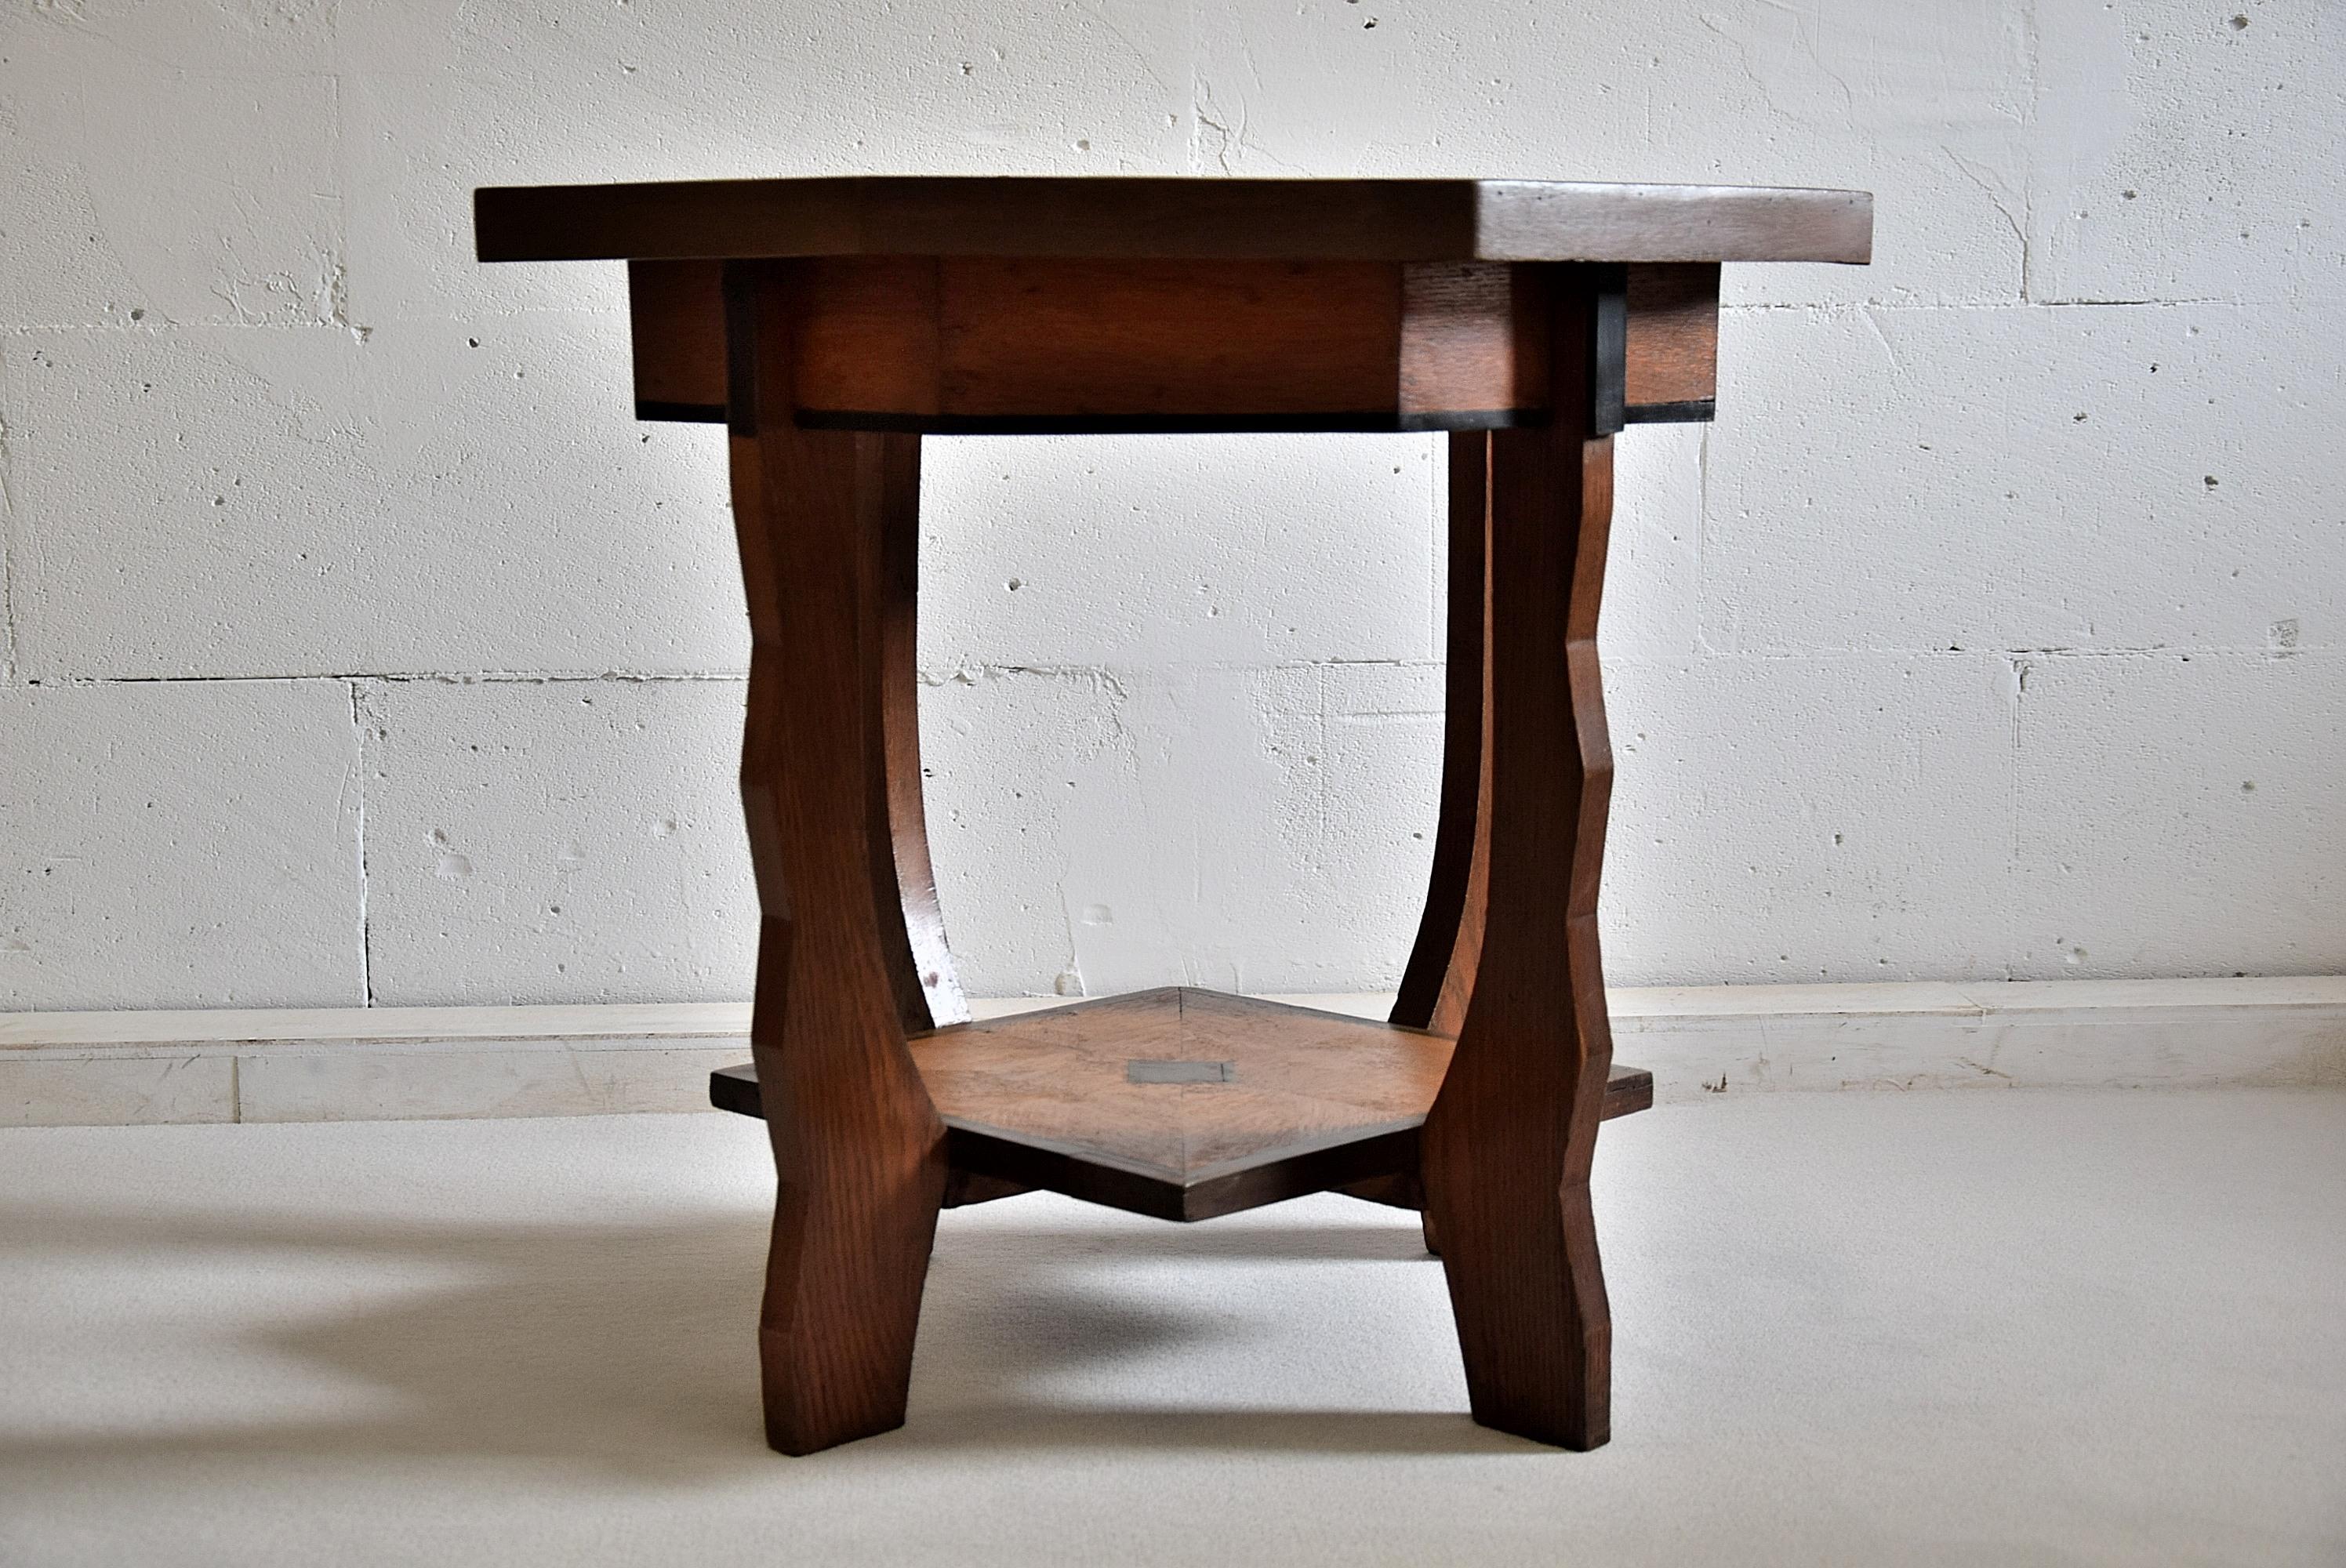 Sophisticated oak and rosewood Art Deco Amsterdam School two-tier side table.
Measurements: W 69 x D 69 x H 63 cm.
The table will be shipped overseas in a custom made wooden crate. Cost of transport to the US crate included is Euro 525.

The